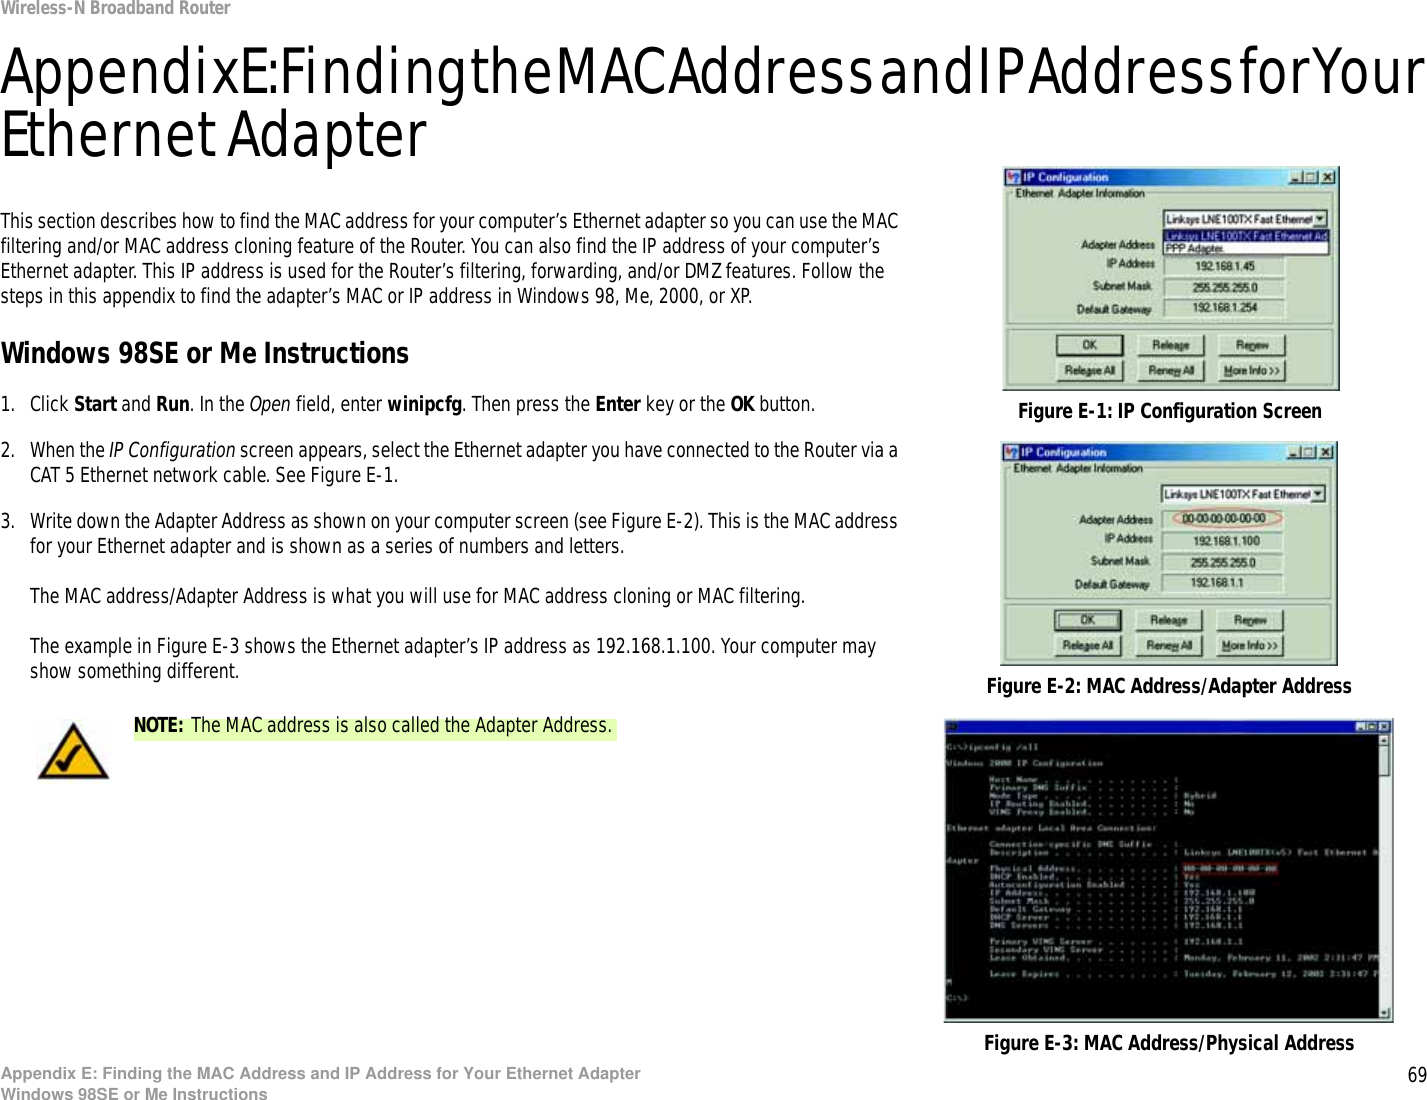 69Appendix E: Finding the MAC Address and IP Address for Your Ethernet AdapterWindows 98SE or Me InstructionsWireless-N Broadband RouterAppendix E: Finding the MAC Address and IP Address for Your Ethernet AdapterThis section describes how to find the MAC address for your computer’s Ethernet adapter so you can use the MAC filtering and/or MAC address cloning feature of the Router. You can also find the IP address of your computer’s Ethernet adapter. This IP address is used for the Router’s filtering, forwarding, and/or DMZ features. Follow the steps in this appendix to find the adapter’s MAC or IP address in Windows 98, Me, 2000, or XP.Windows 98SE or Me Instructions1. Click Start and Run. In the Open field, enter winipcfg. Then press the Enter key or the OK button. 2. When the IP Configuration screen appears, select the Ethernet adapter you have connected to the Router via a CAT 5 Ethernet network cable. See Figure E-1.3. Write down the Adapter Address as shown on your computer screen (see Figure E-2). This is the MAC address for your Ethernet adapter and is shown as a series of numbers and letters.The MAC address/Adapter Address is what you will use for MAC address cloning or MAC filtering.The example in Figure E-3 shows the Ethernet adapter’s IP address as 192.168.1.100. Your computer may show something different. Figure E-2: MAC Address/Adapter AddressFigure E-1: IP Configuration ScreenNOTE: The MAC address is also called the Adapter Address.Figure E-3: MAC Address/Physical Address